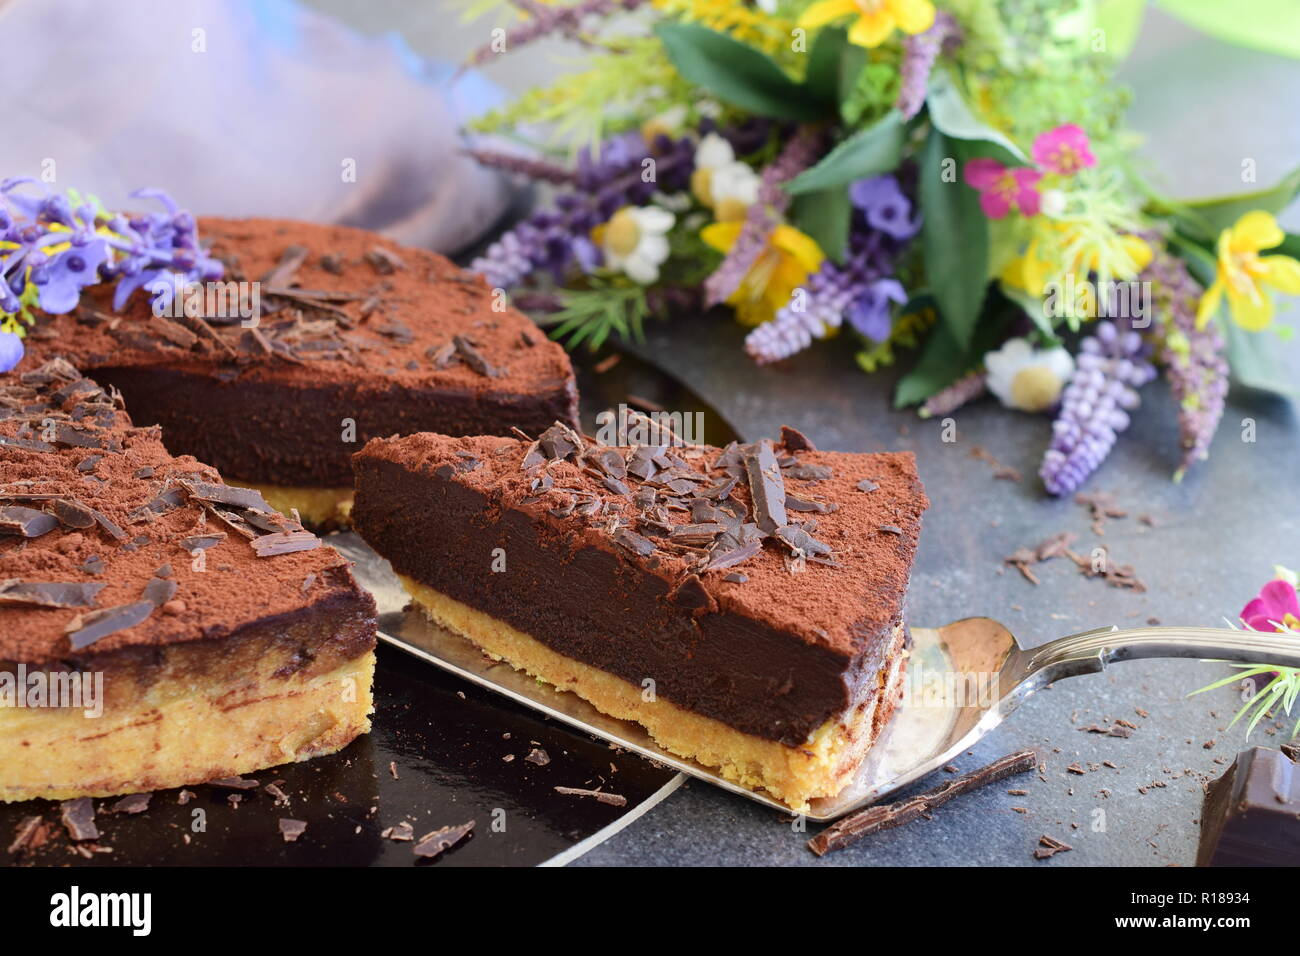 No bake cake, biscuit base with cocolate ganash. Stock Photo